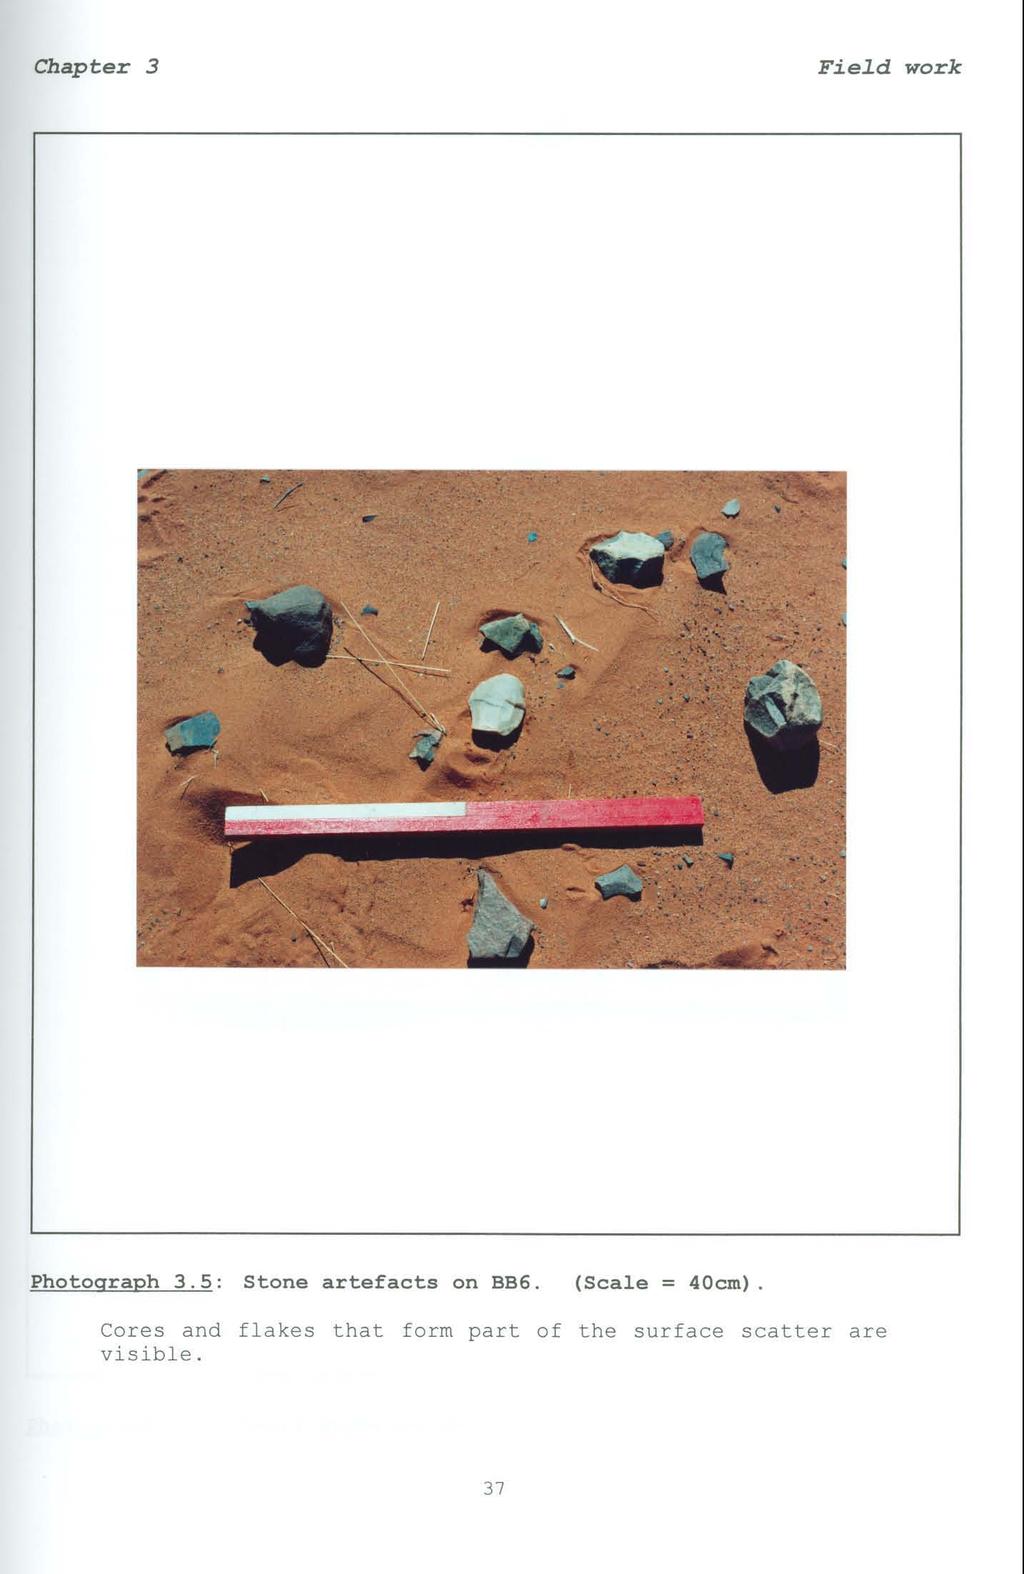 Fied work Photograph 3. 5: Stone artefacts on BB6. (Scale = 40cm).